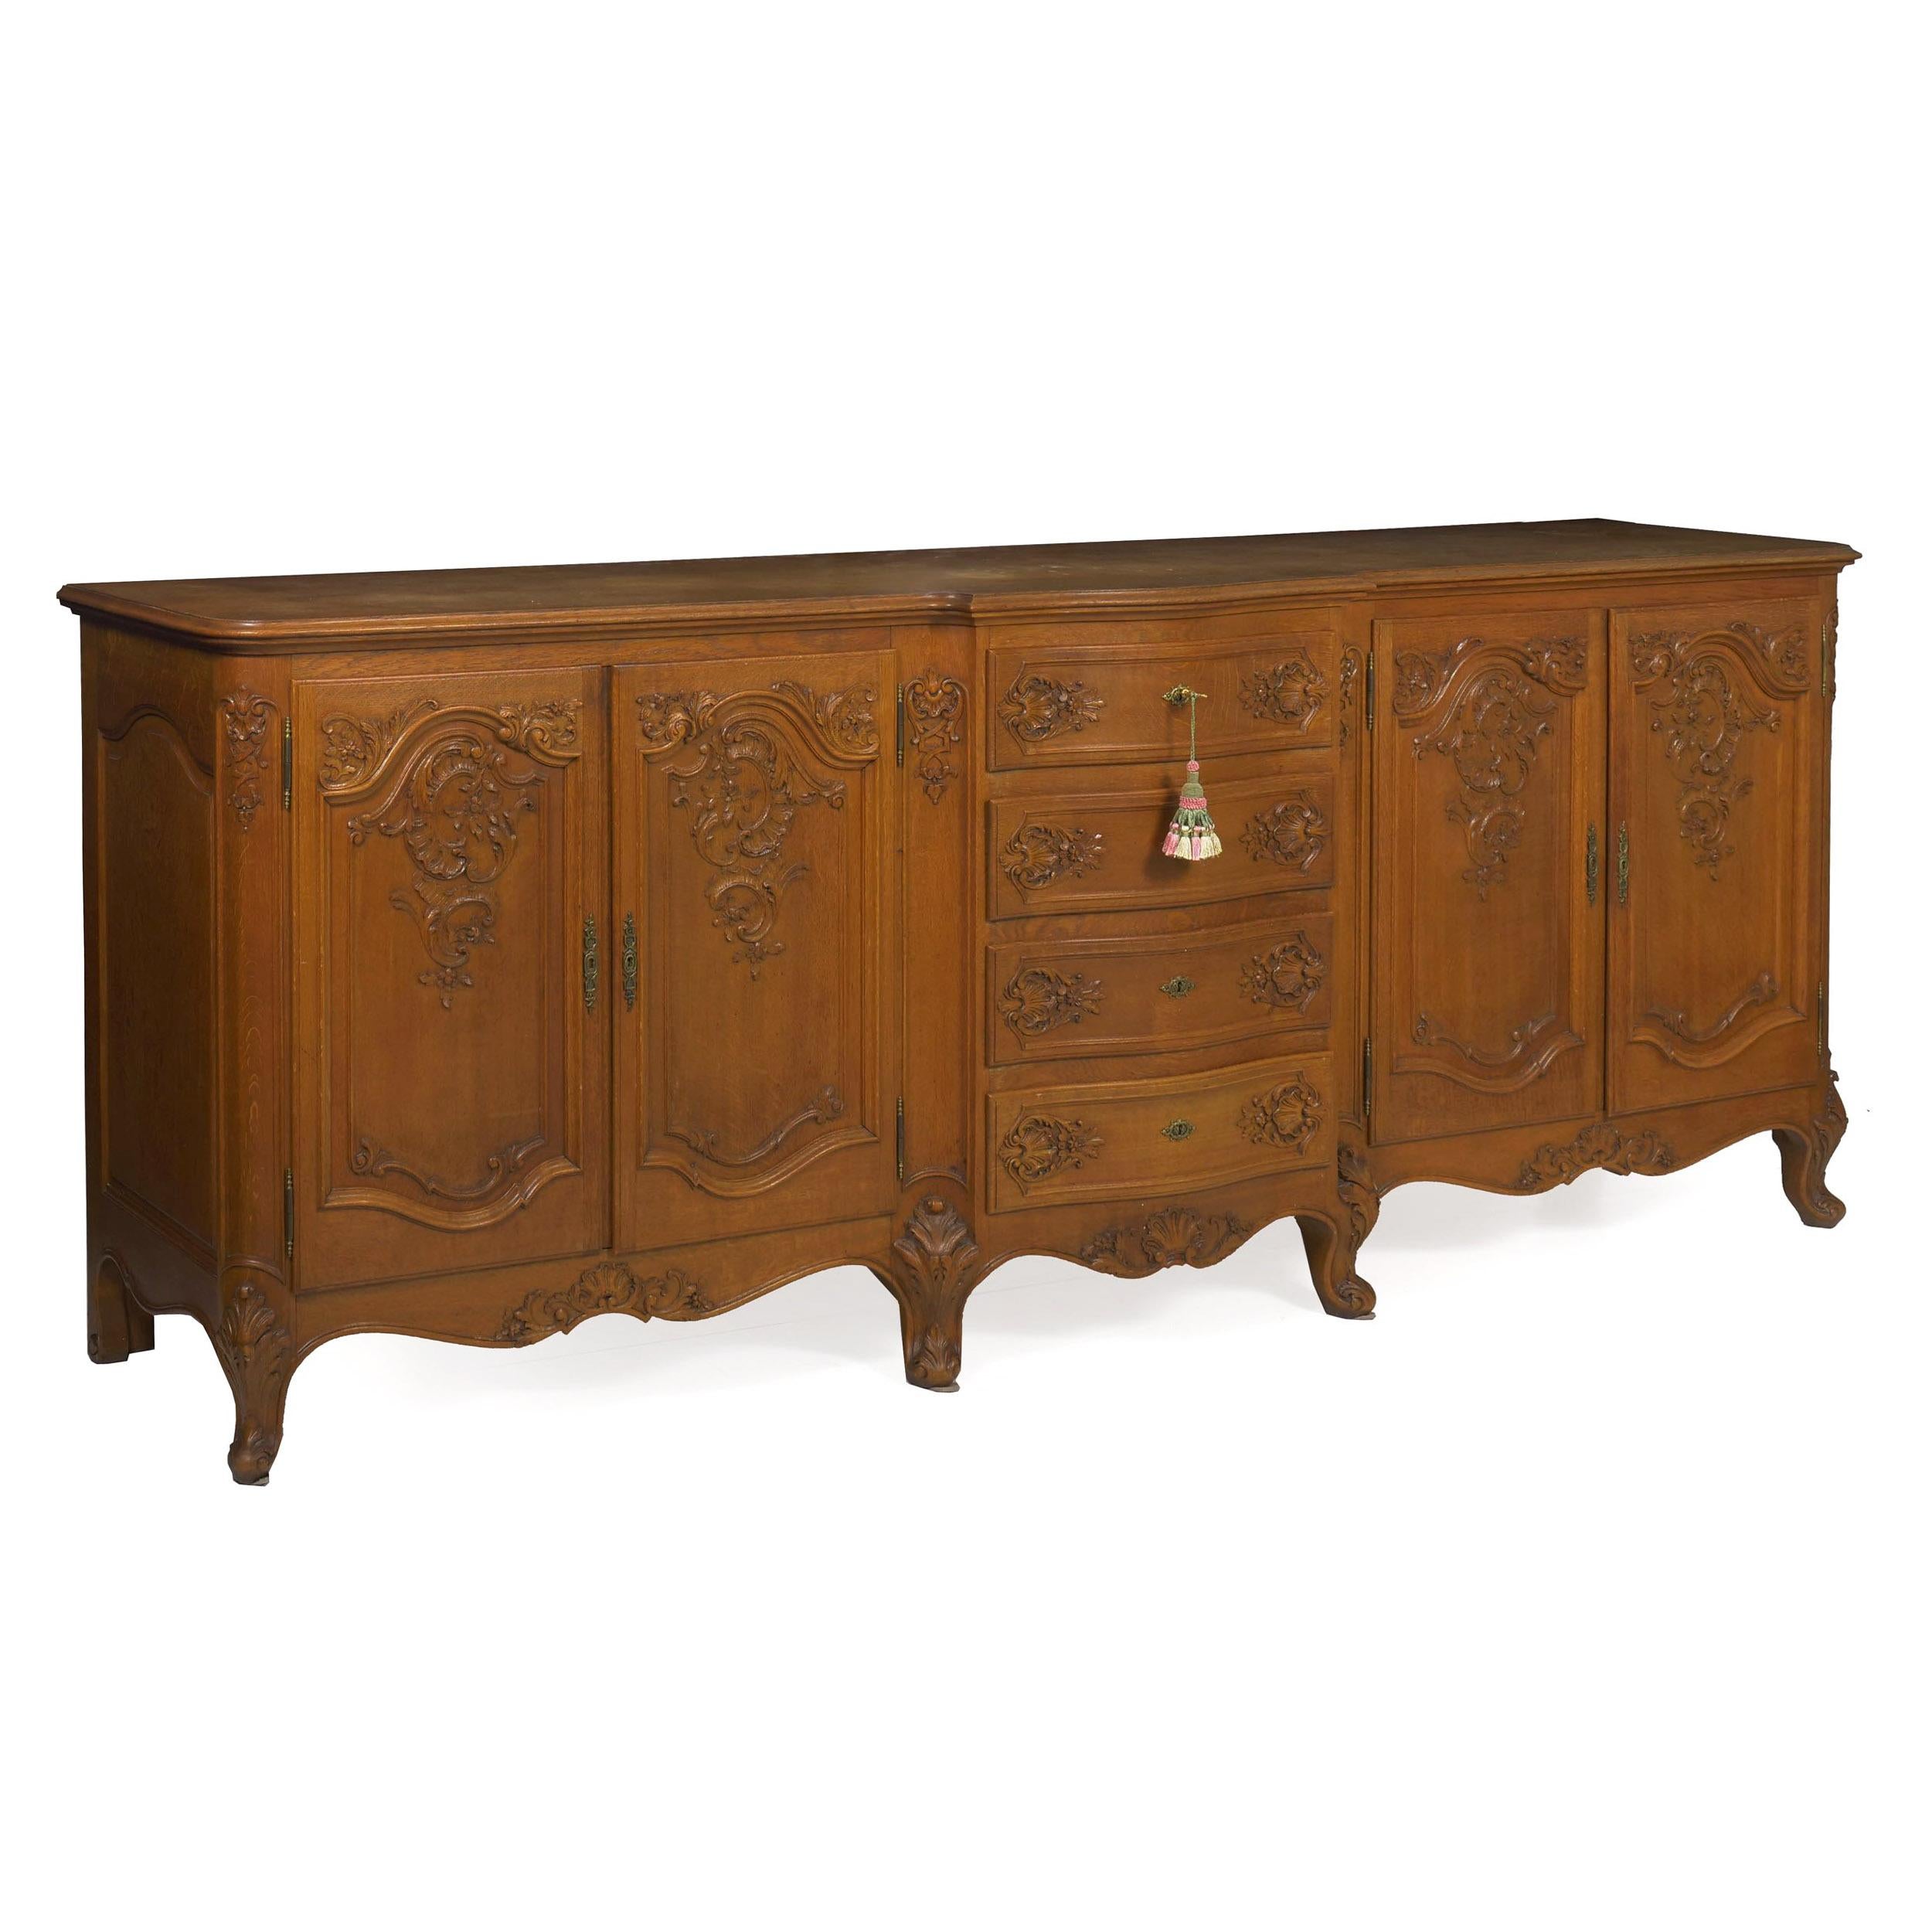 This powerful carved oak buffet is a true statement piece. With a massive length of 101 inches, it is an absolute strikepoint piece. Crafted beautifully out of solid golden oak, the drawers are hand-dovetailed in the typical manner and the facade is